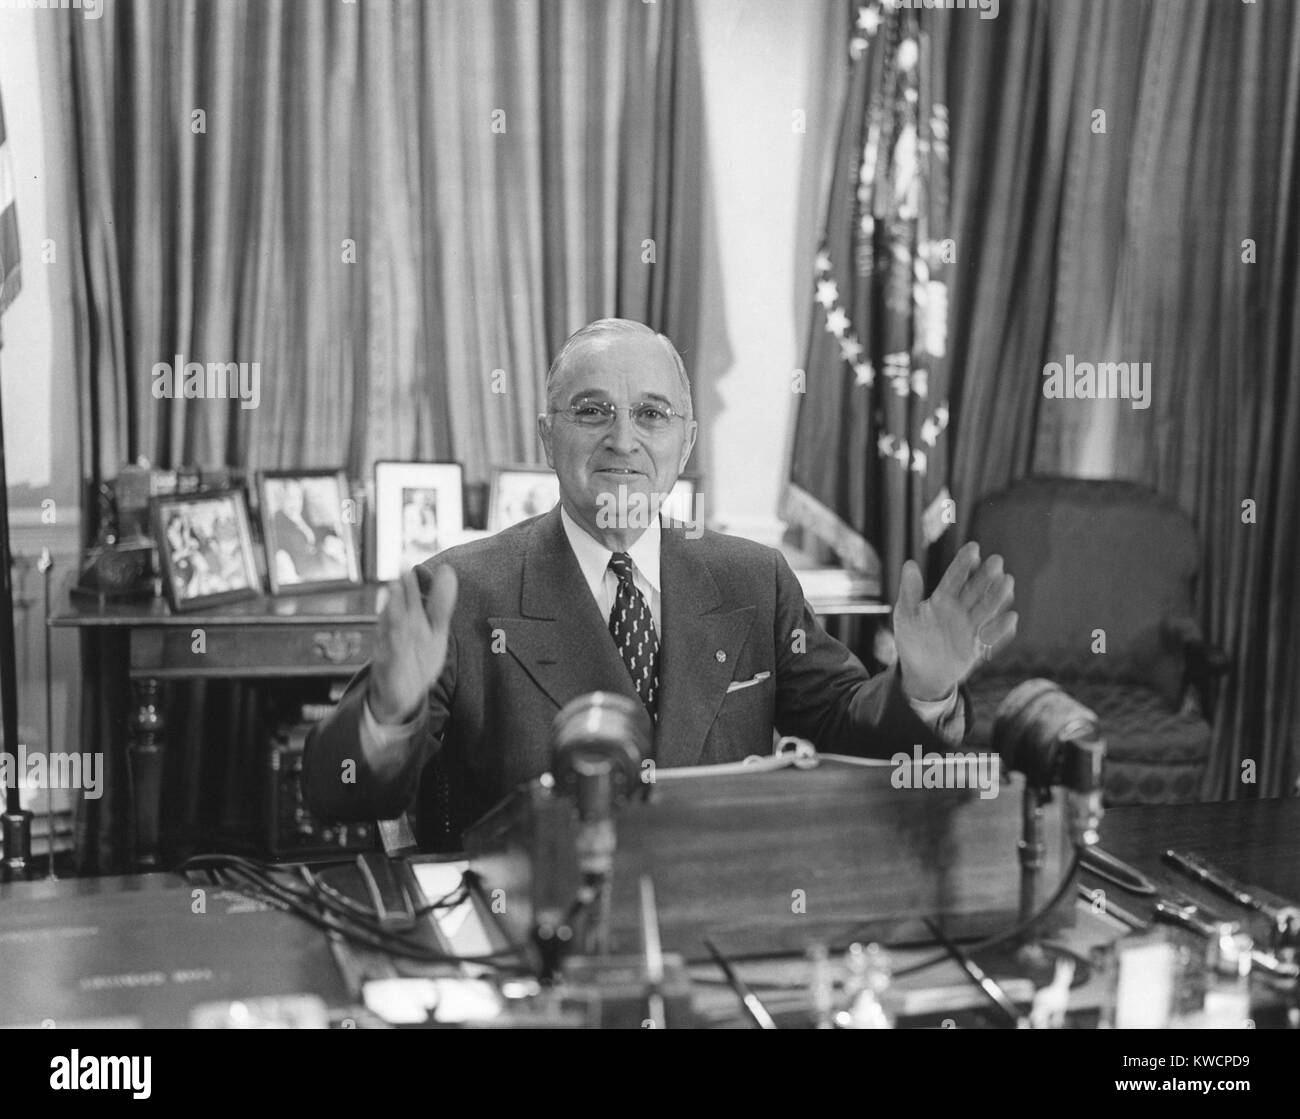 Truman delivers a radio and television address about a United Nations arms reduction proposal. Nov. 7, 1951. It was unsuccessful and throughout the 1950s Cold War nuclear stockpiles expanded. - (BSLOC 2014 15 82) Stock Photo